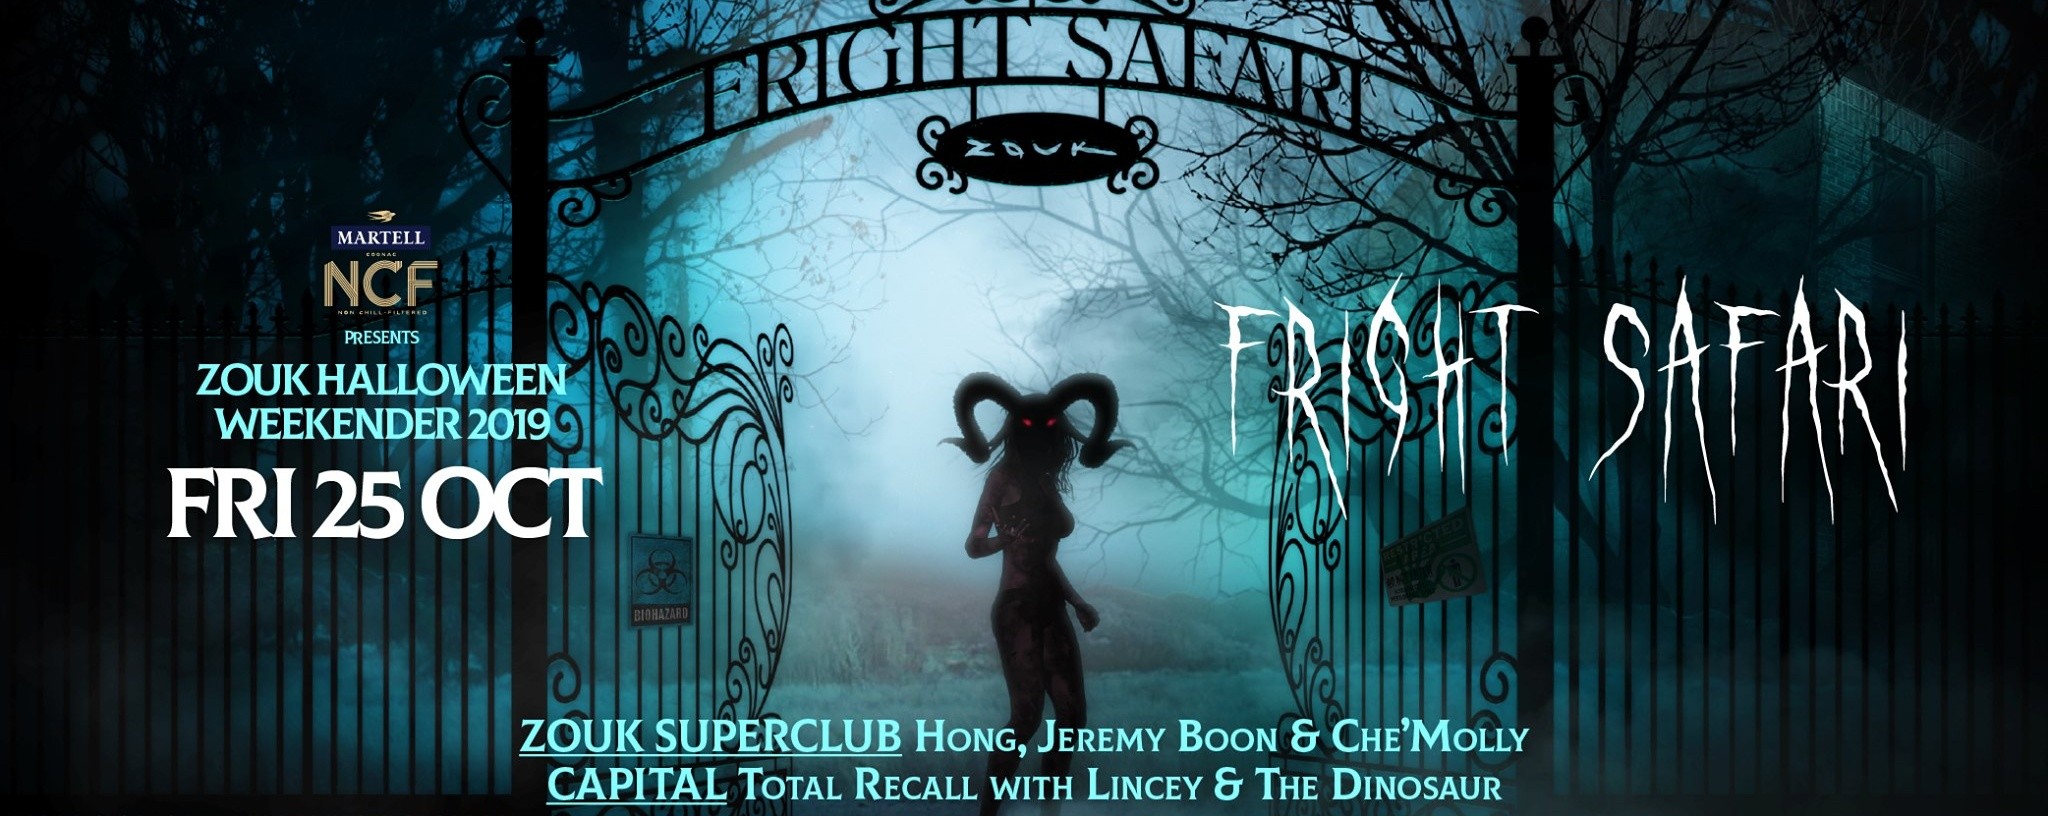 MARTELL NCF PRESENTS FRIGHT SAFARI WITH HONG, JEREMY BOON & CHE’MOLLY